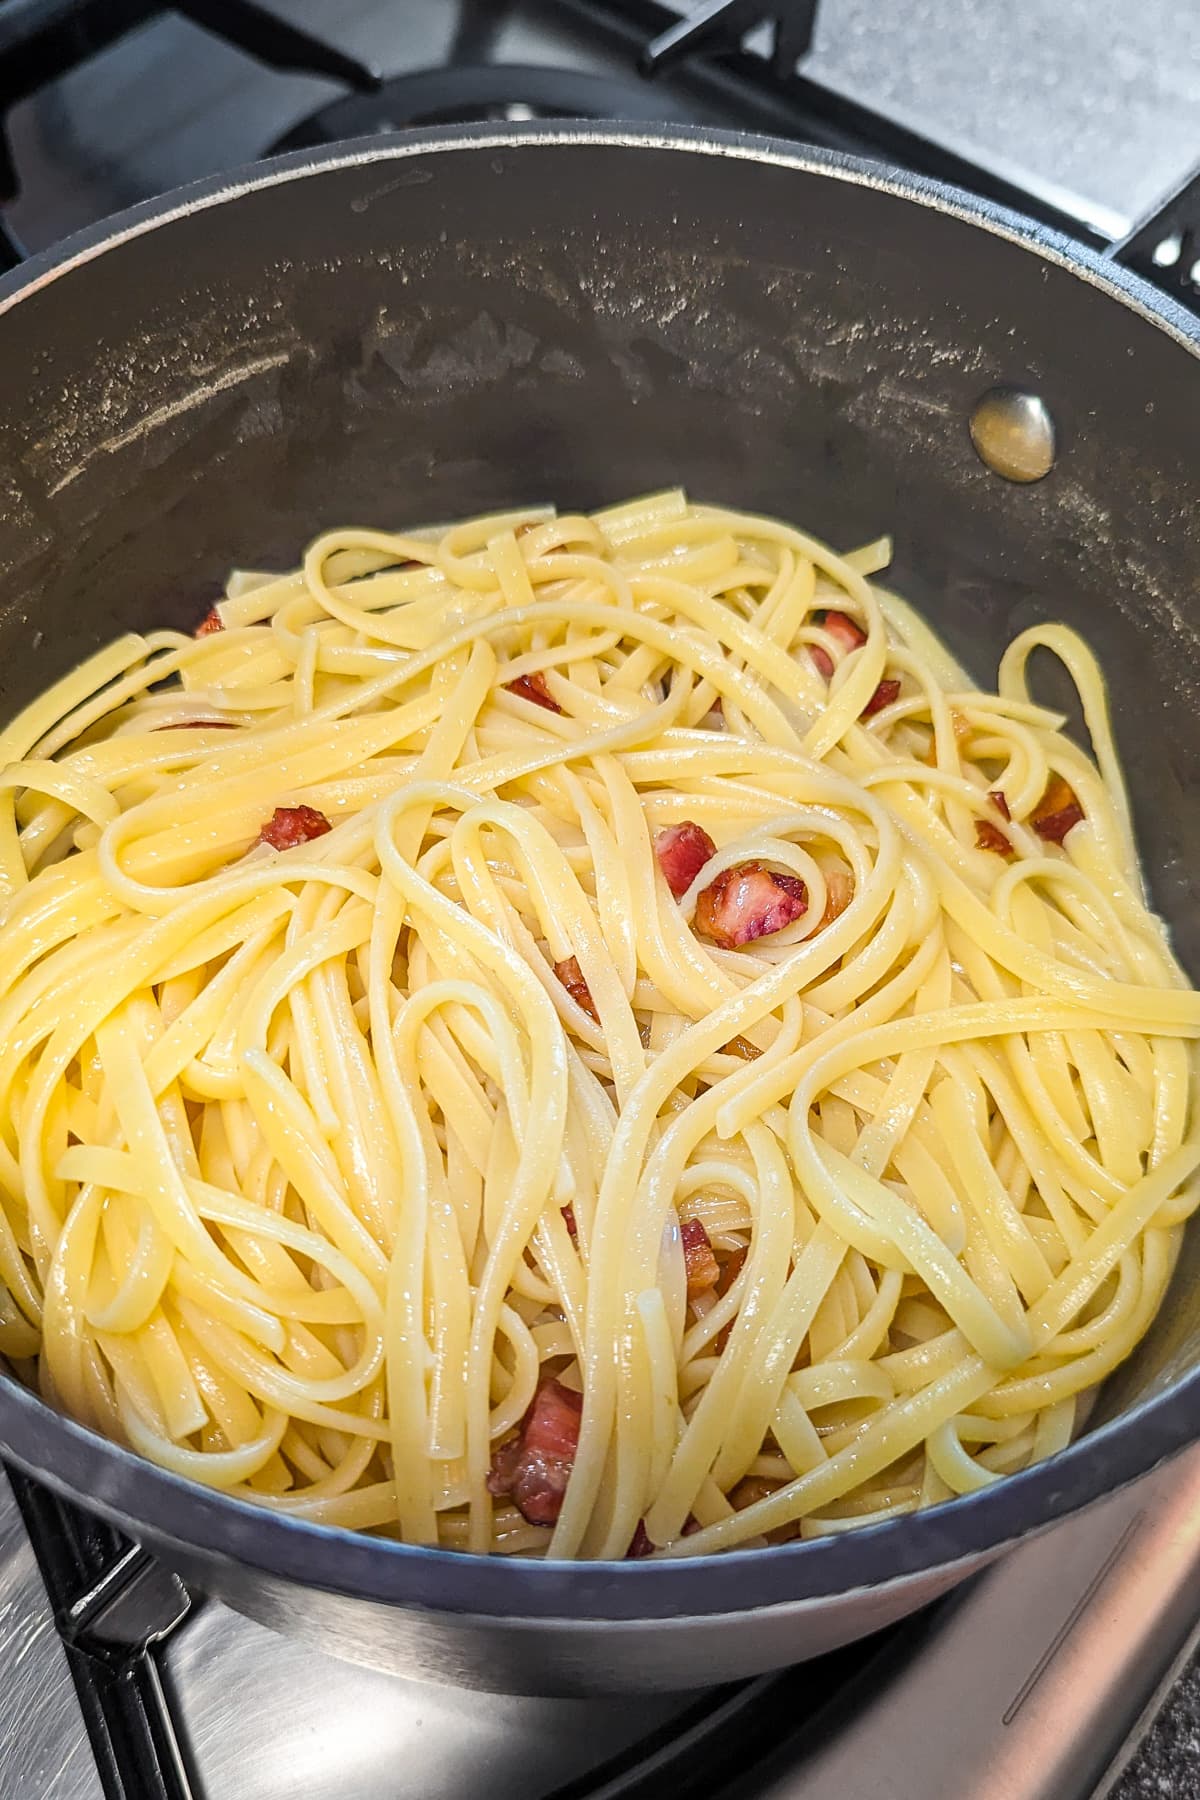 Boiled spaghetti mixed with fried bacon pieces.